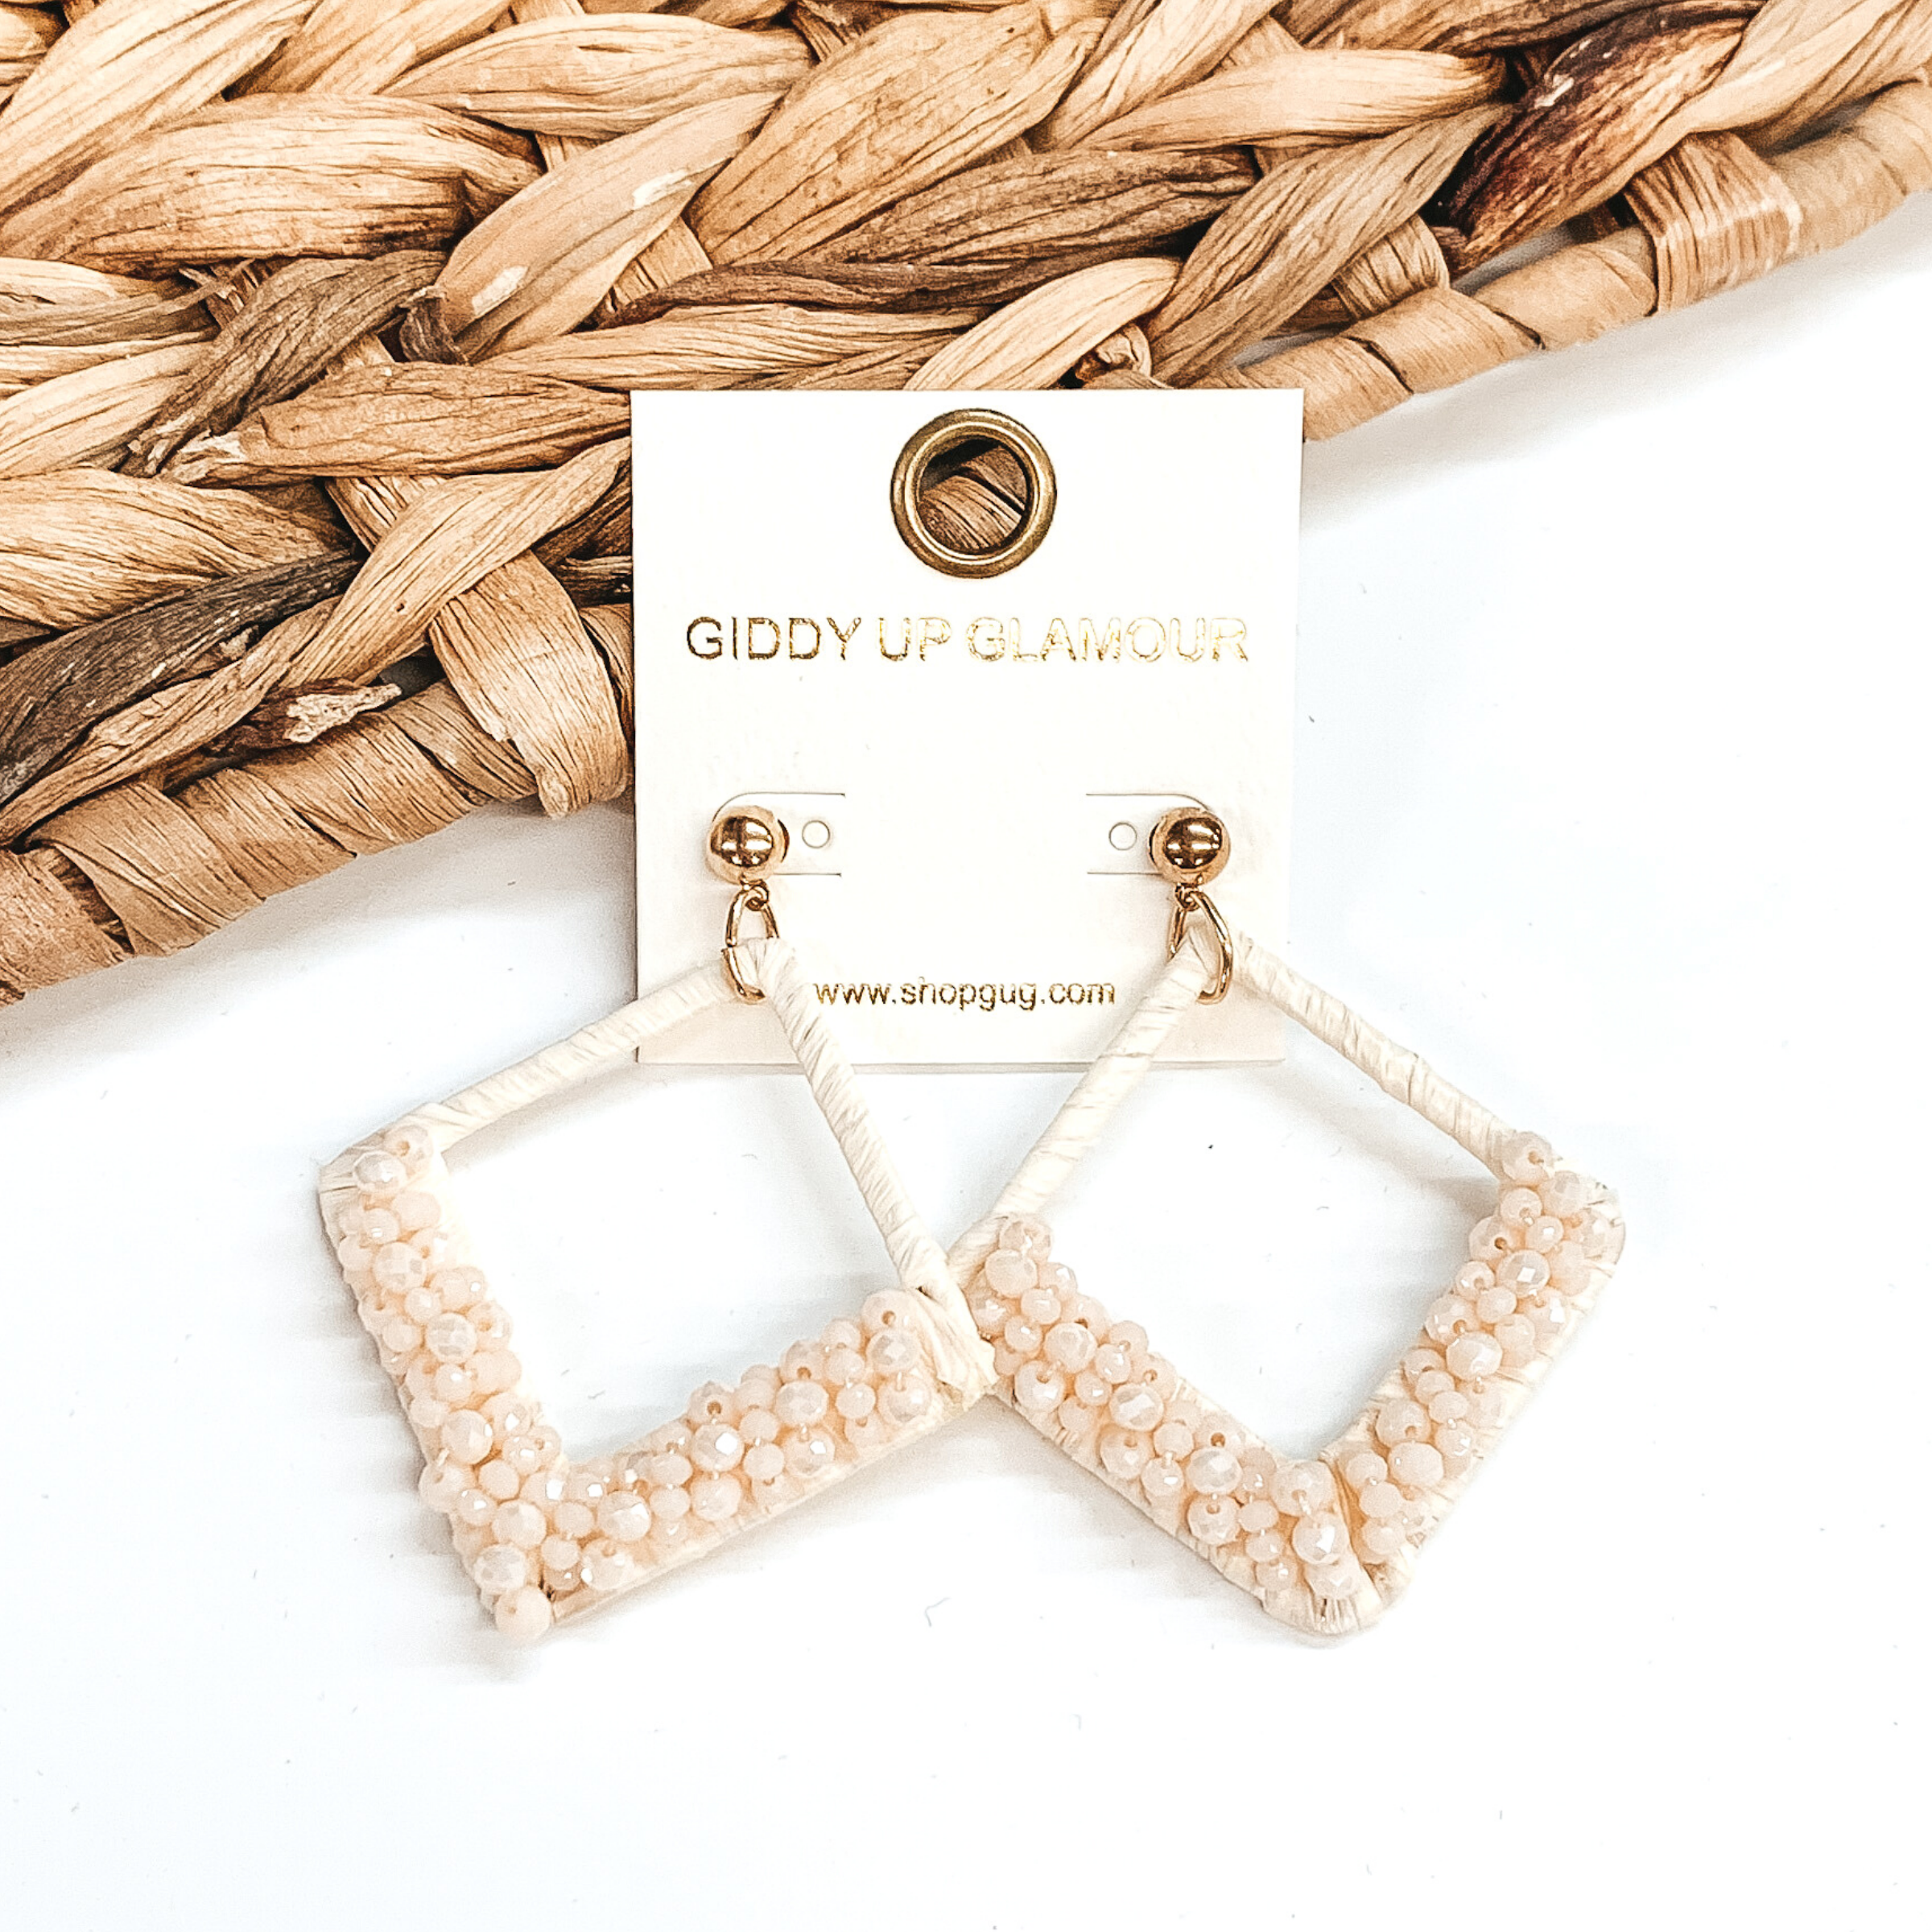  Open diamond shaped dangle earrings wrapped in raffia that includes a layer of beads on the bottom half of the earrings. These earrings are ivory in color. These earrings are pictured on on a white background with basket weave decor.